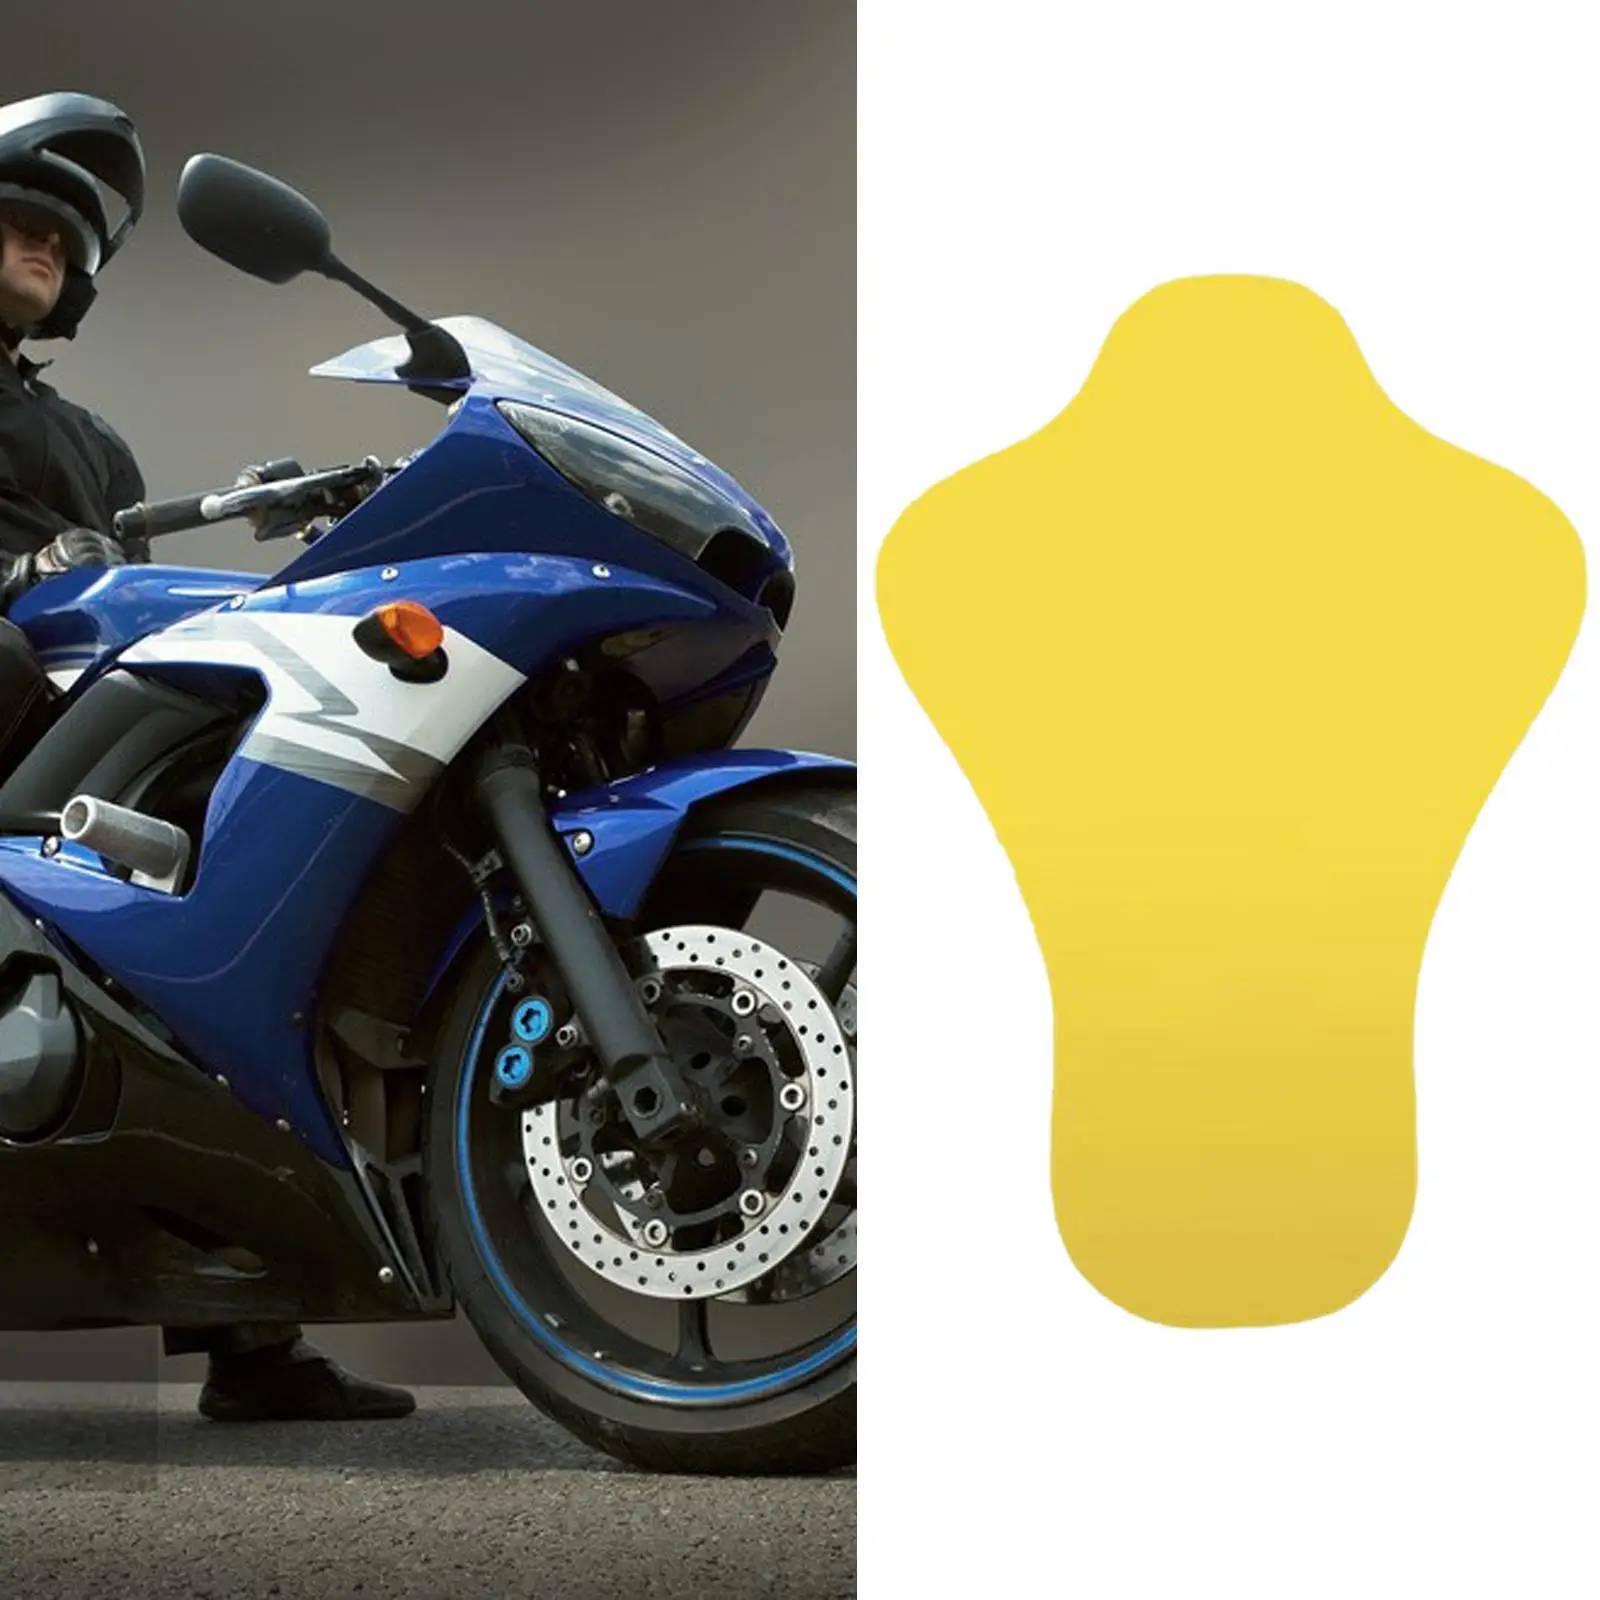 Motorcycle Back Guards Motorcycle Biker Riding Removable Back Chest Protector Pads Breathable Protective Gear for Sport Fitments